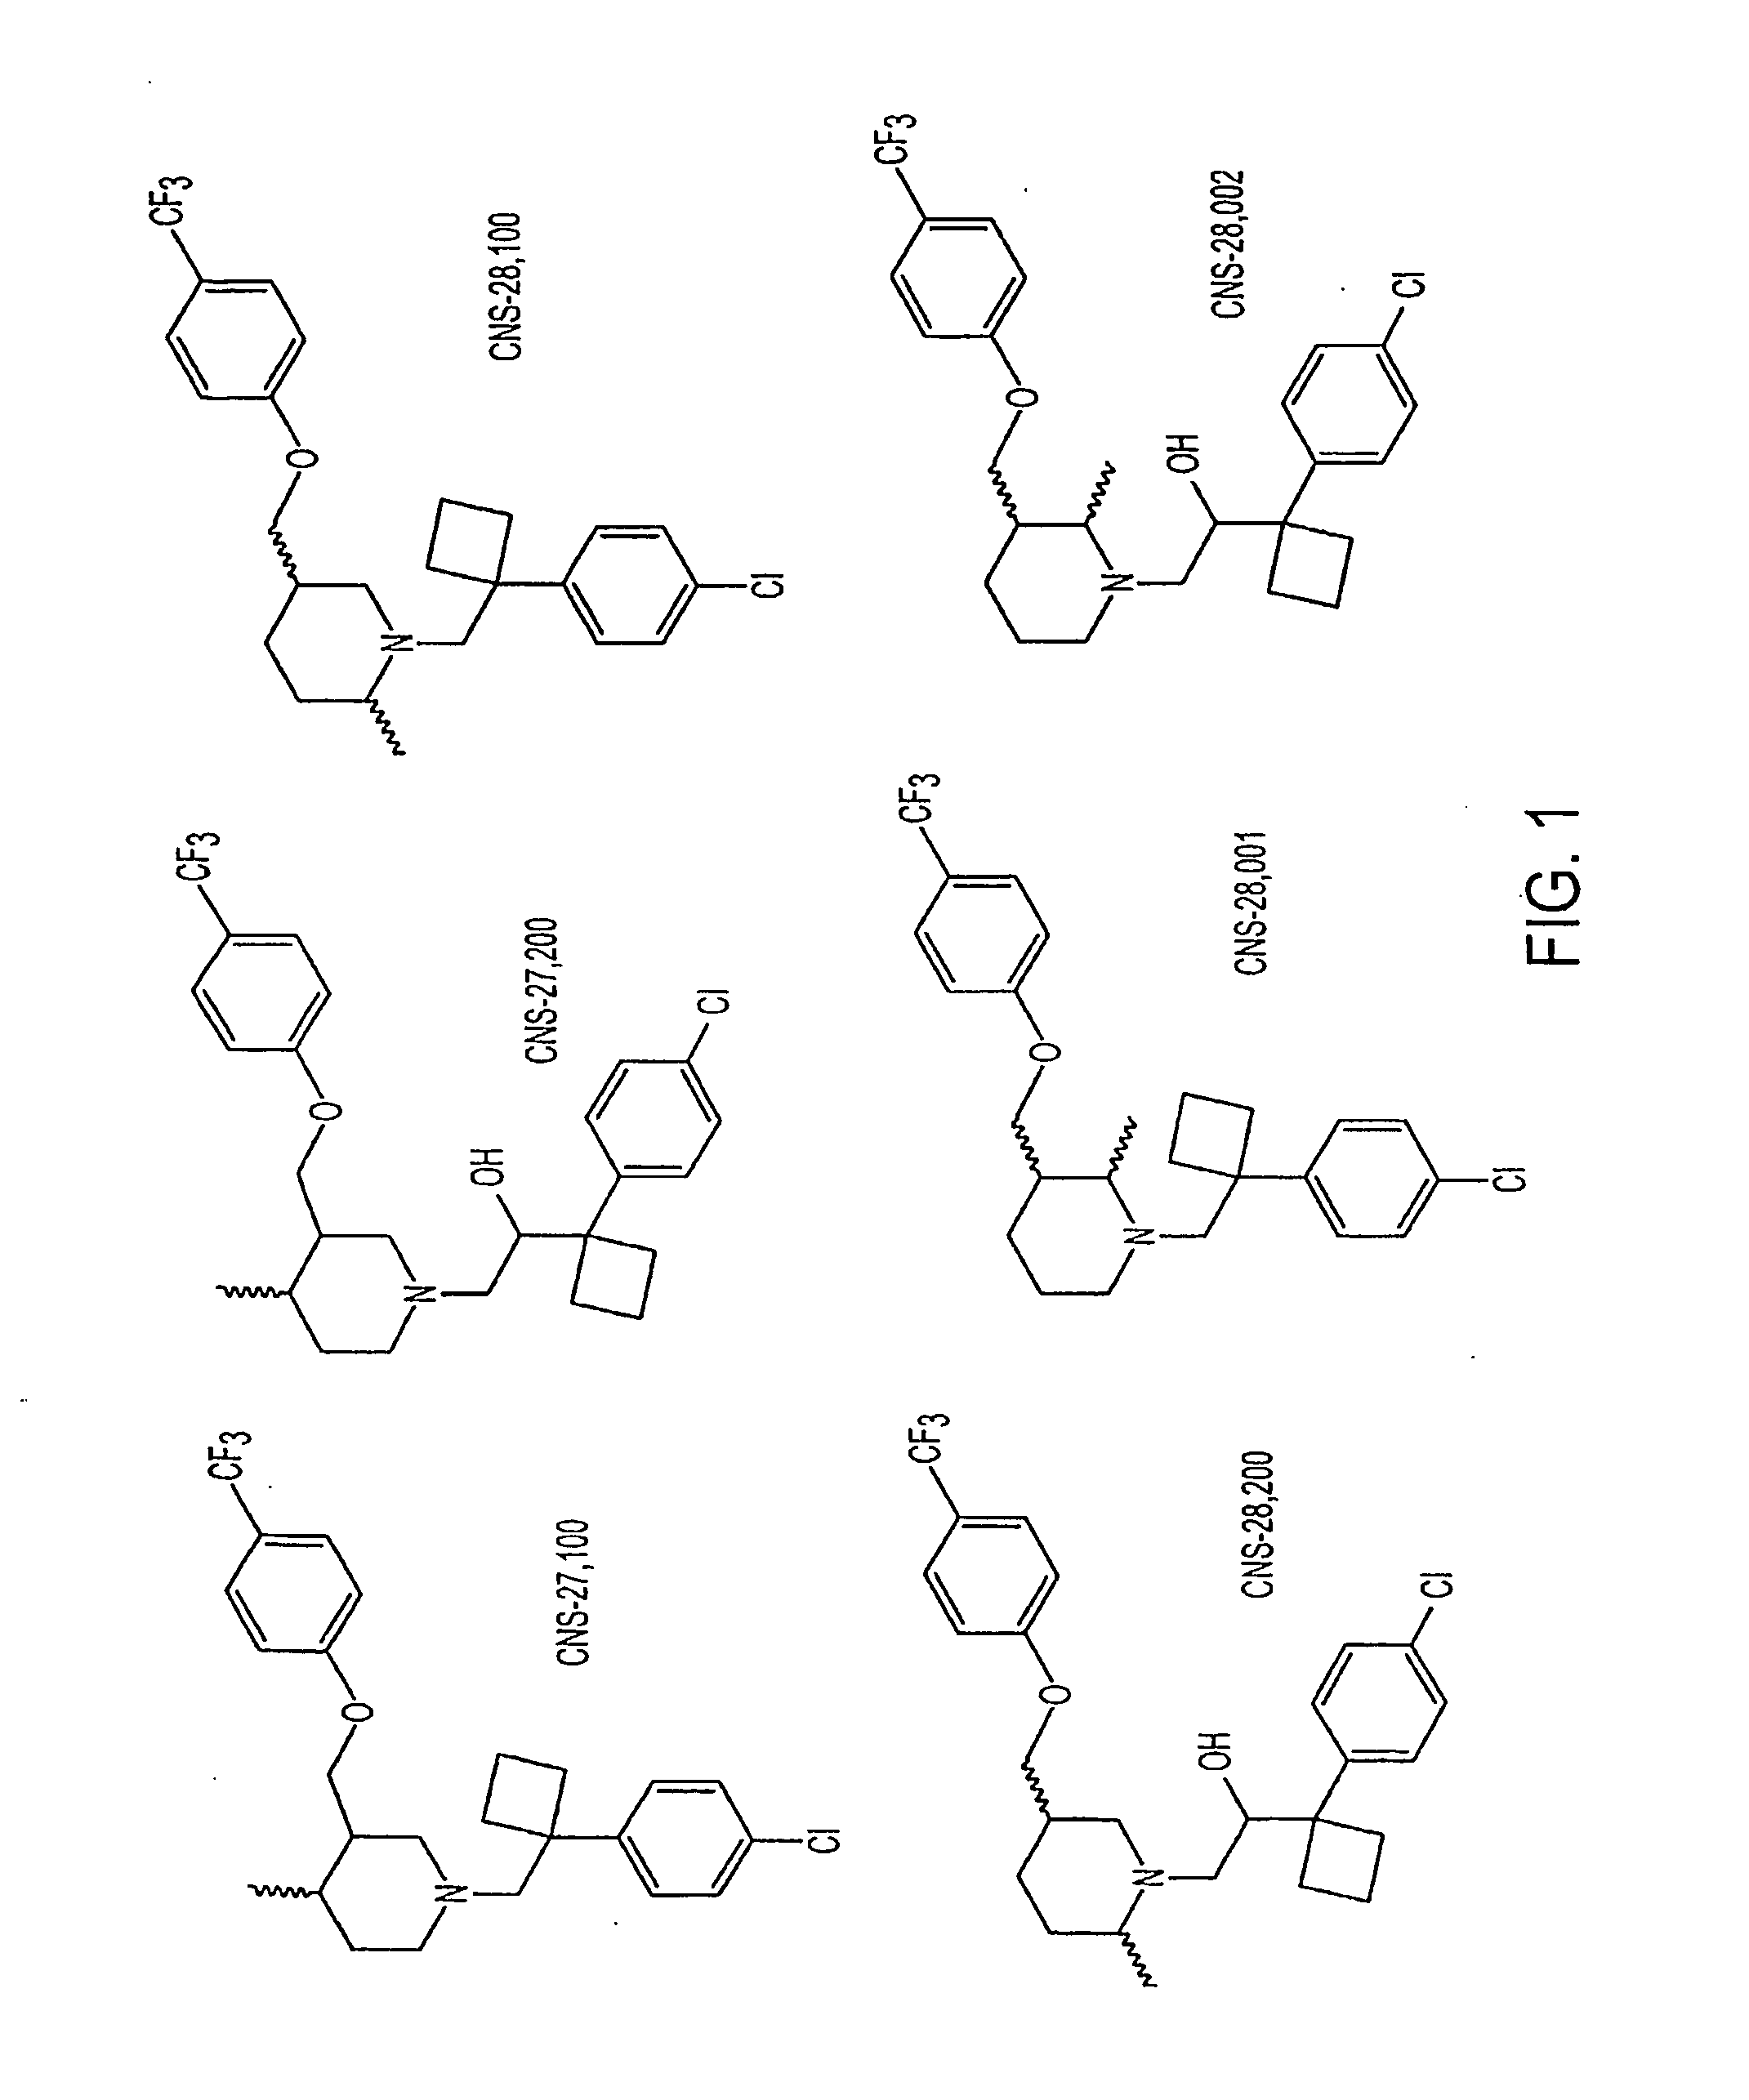 Dopamine Transporter Inhibitors for Use in Treatment of Movement Disorders and Other CNS Indications